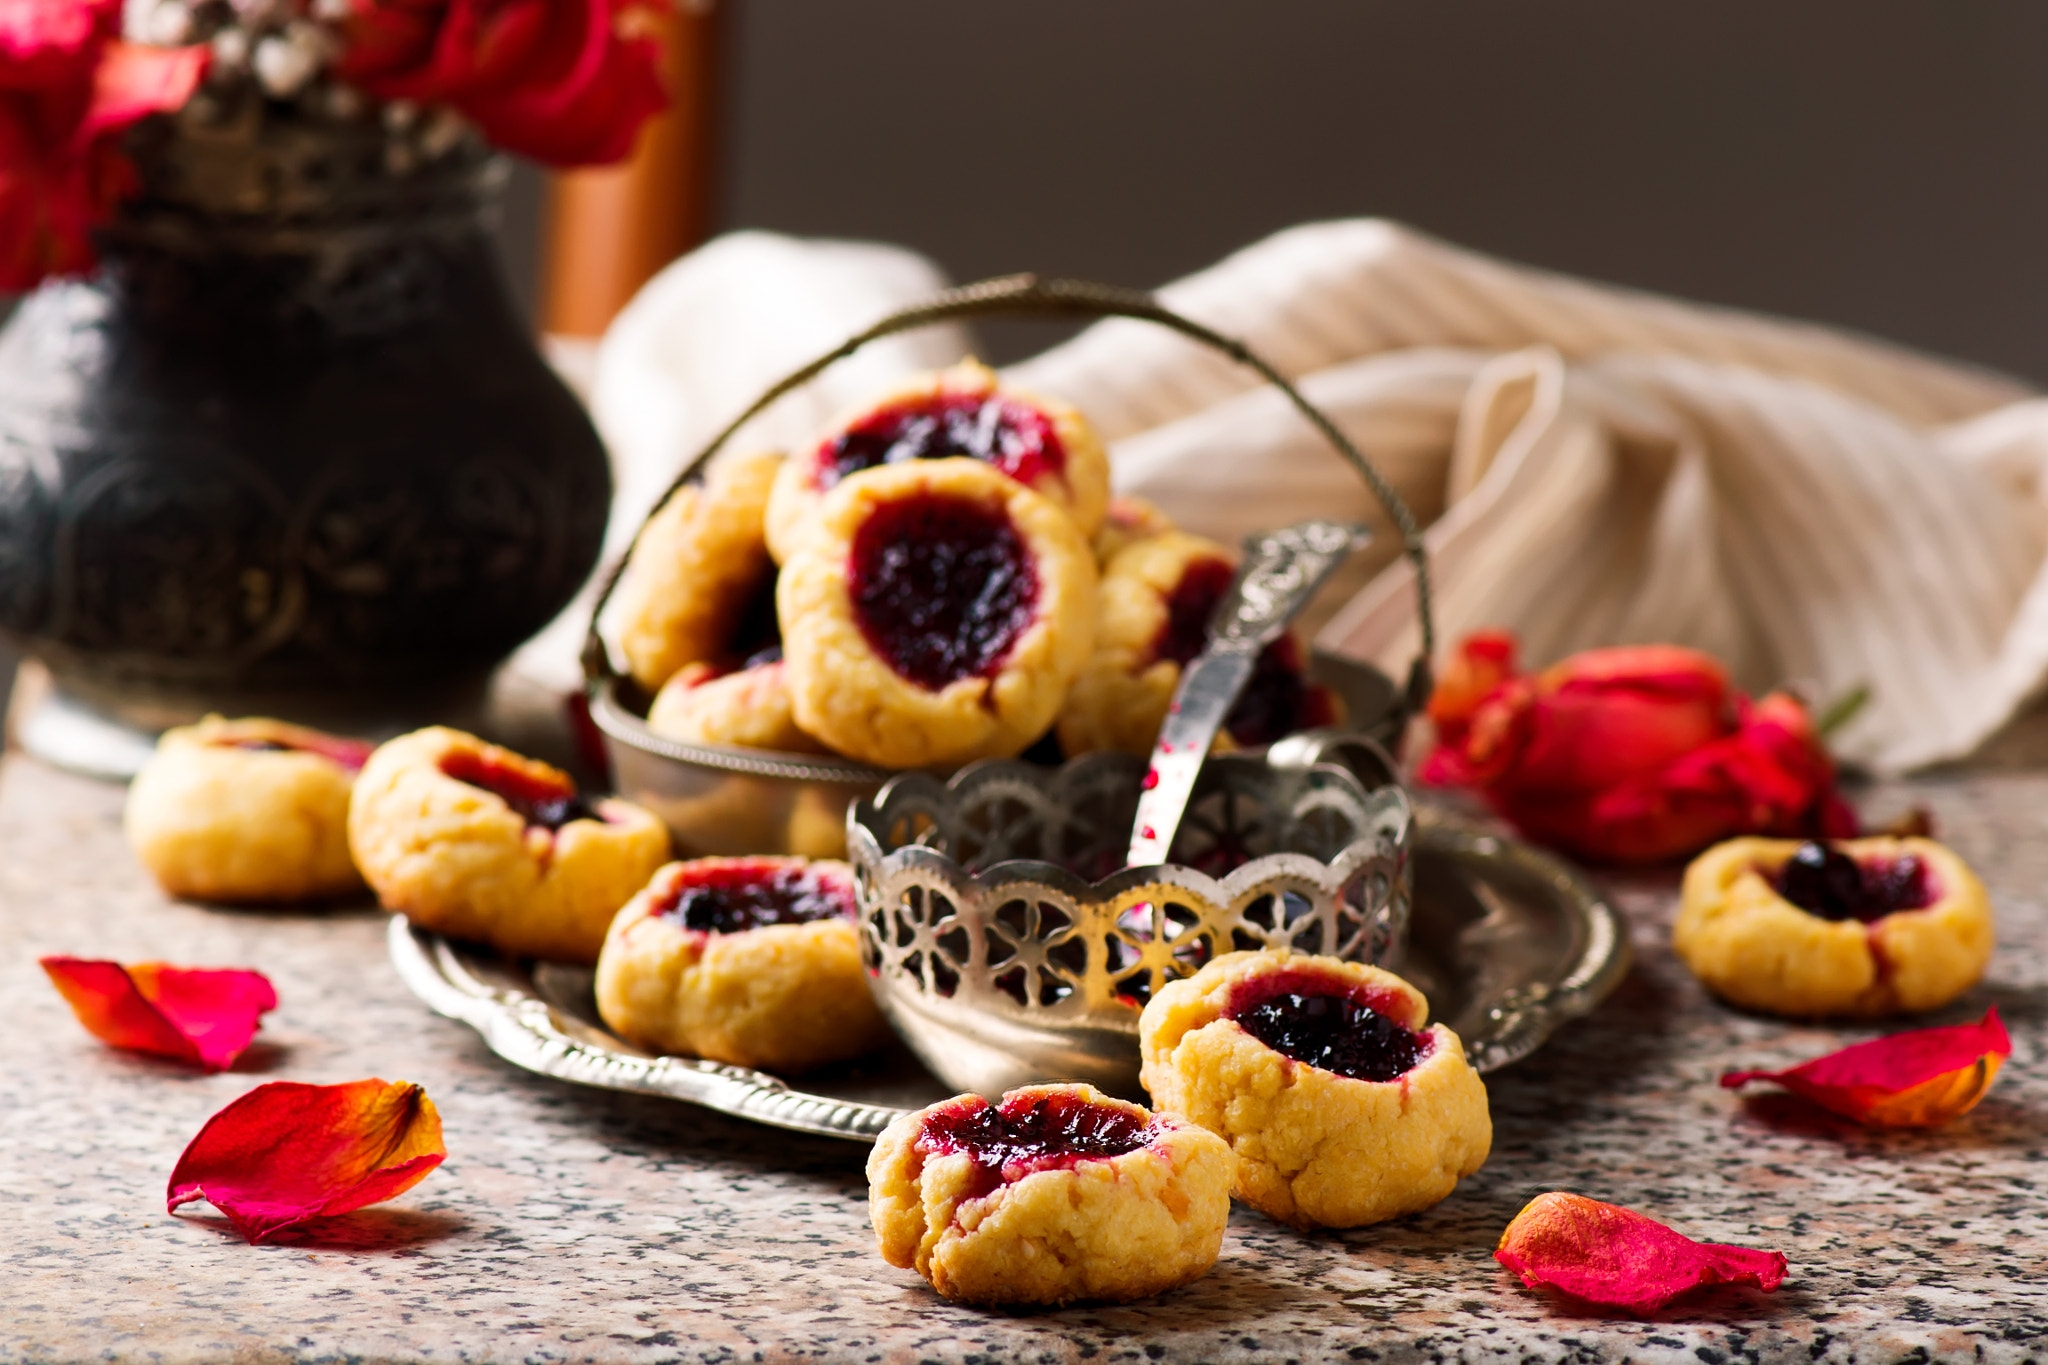 Nikon D3100 + Nikon AF-S Micro-Nikkor 105mm F2.8G IF-ED VR sample photo. Cookies with blackcurrant jam..style rustic photography